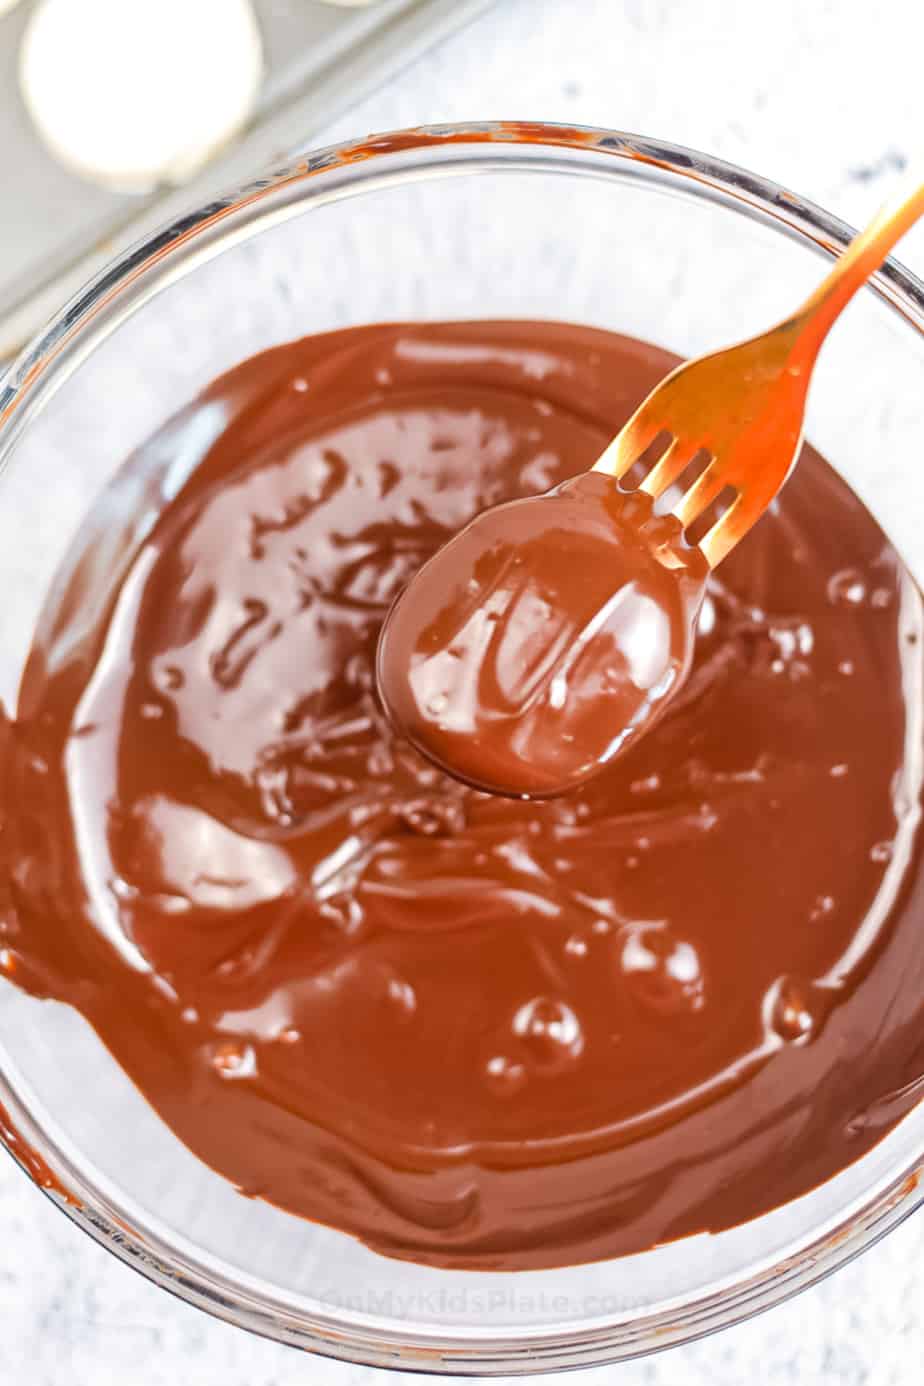 One peppermint candy being dipped in a bowl of chocolate with a fork